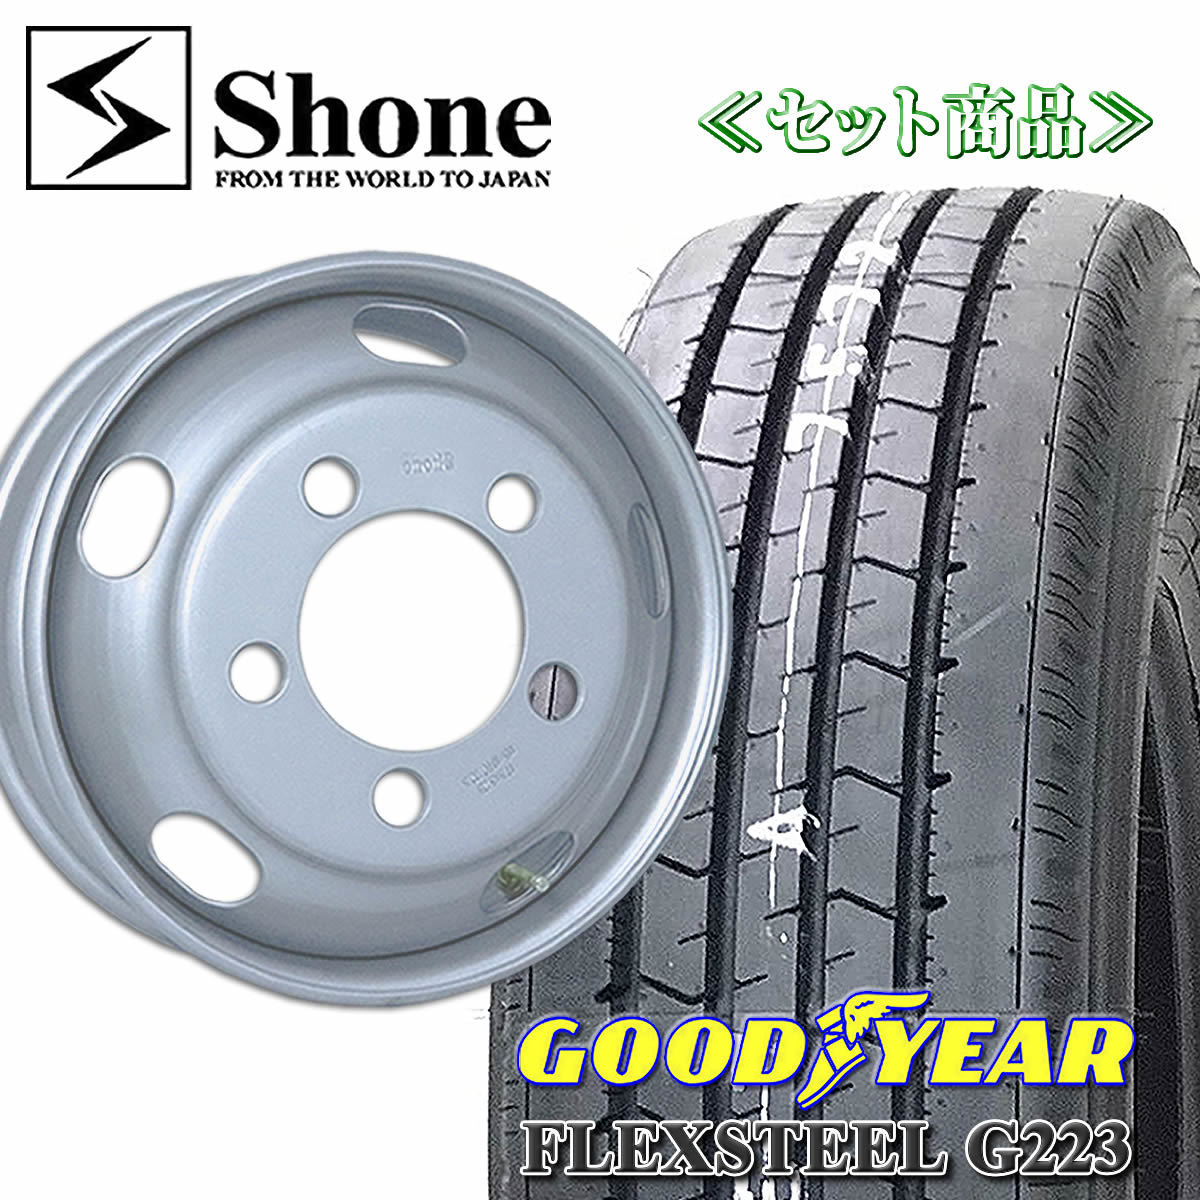  stock necessary verification Canter for Goodyear FLEX STEEL G223 205/80R17.5 LT iron wheel attaching 17.5×5.25 +115 1 pcs price summer NO,GY011SH010-1